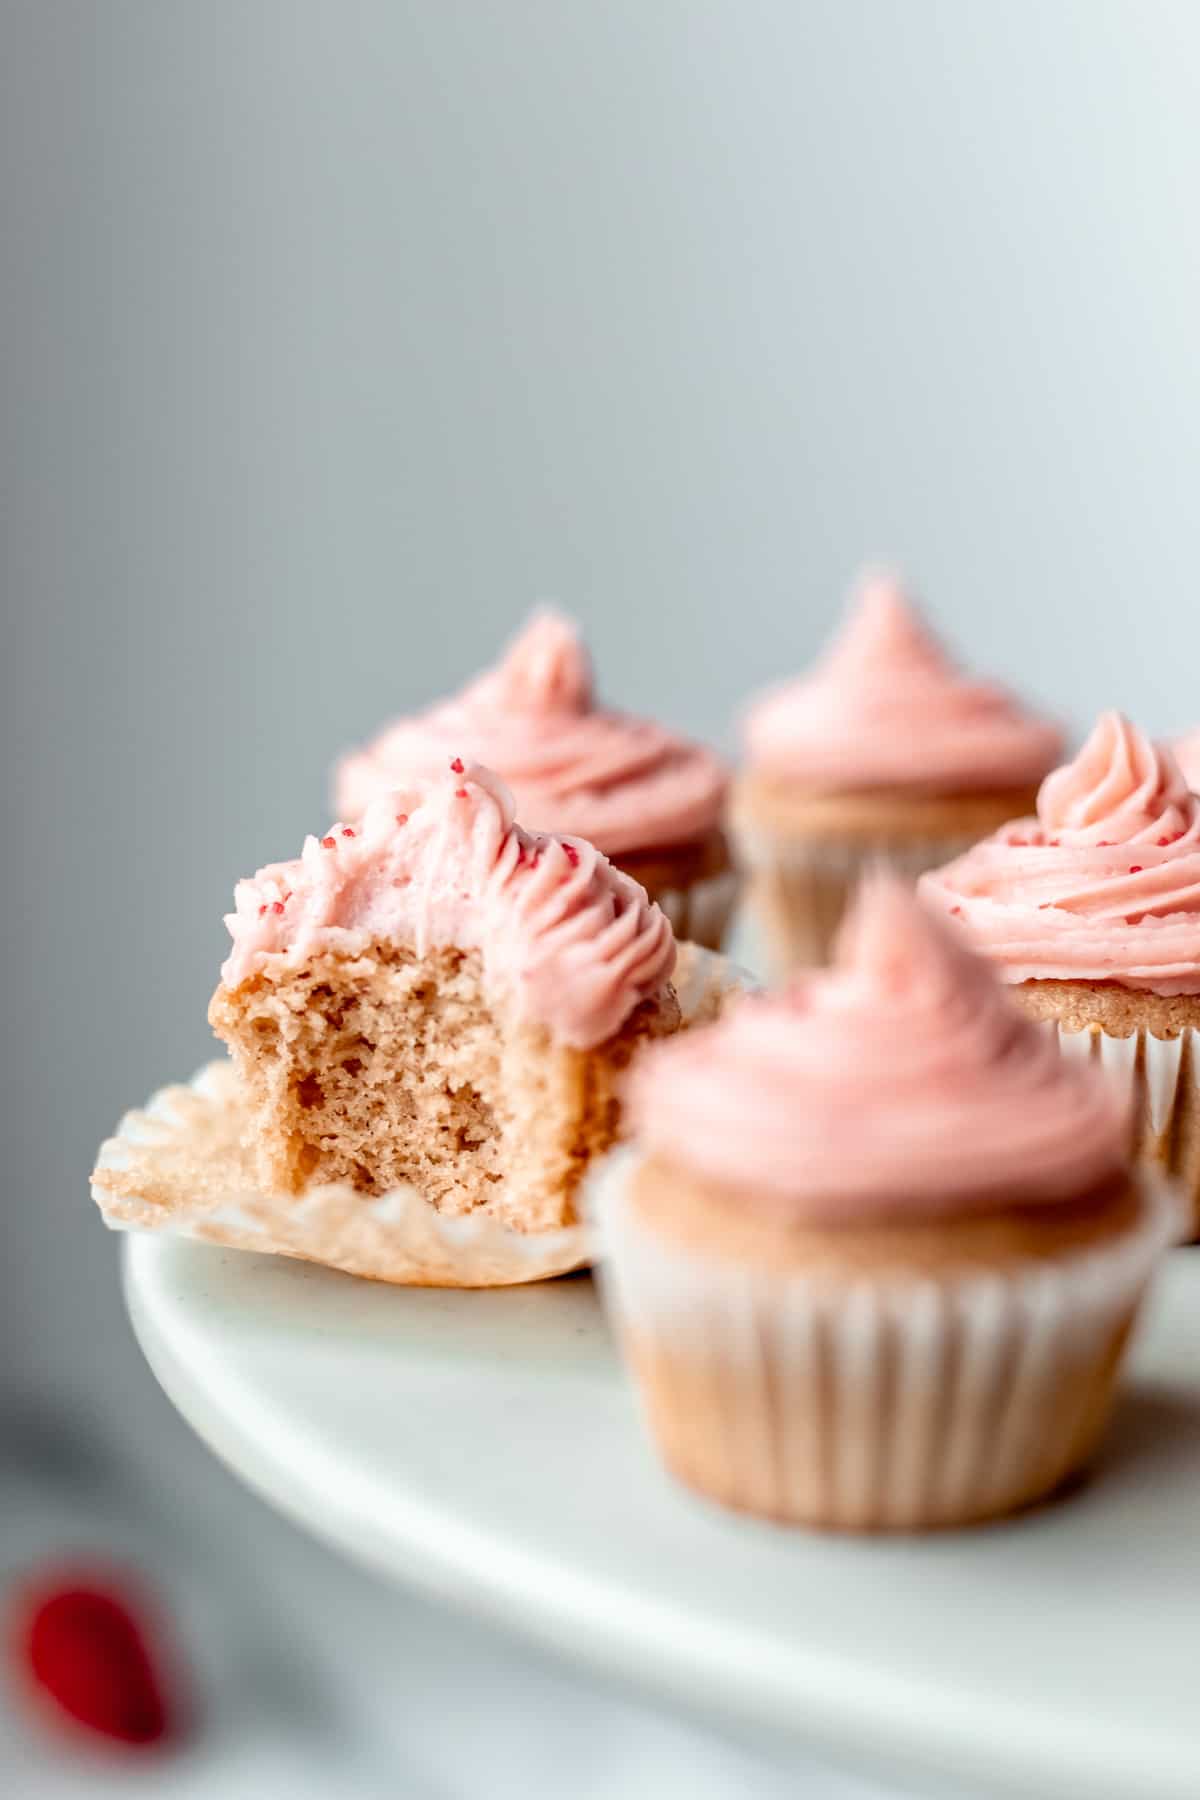 A mini strawberry cupcakes with a bite taken out of it with other mini cupcakes around it on a gray cake stand.